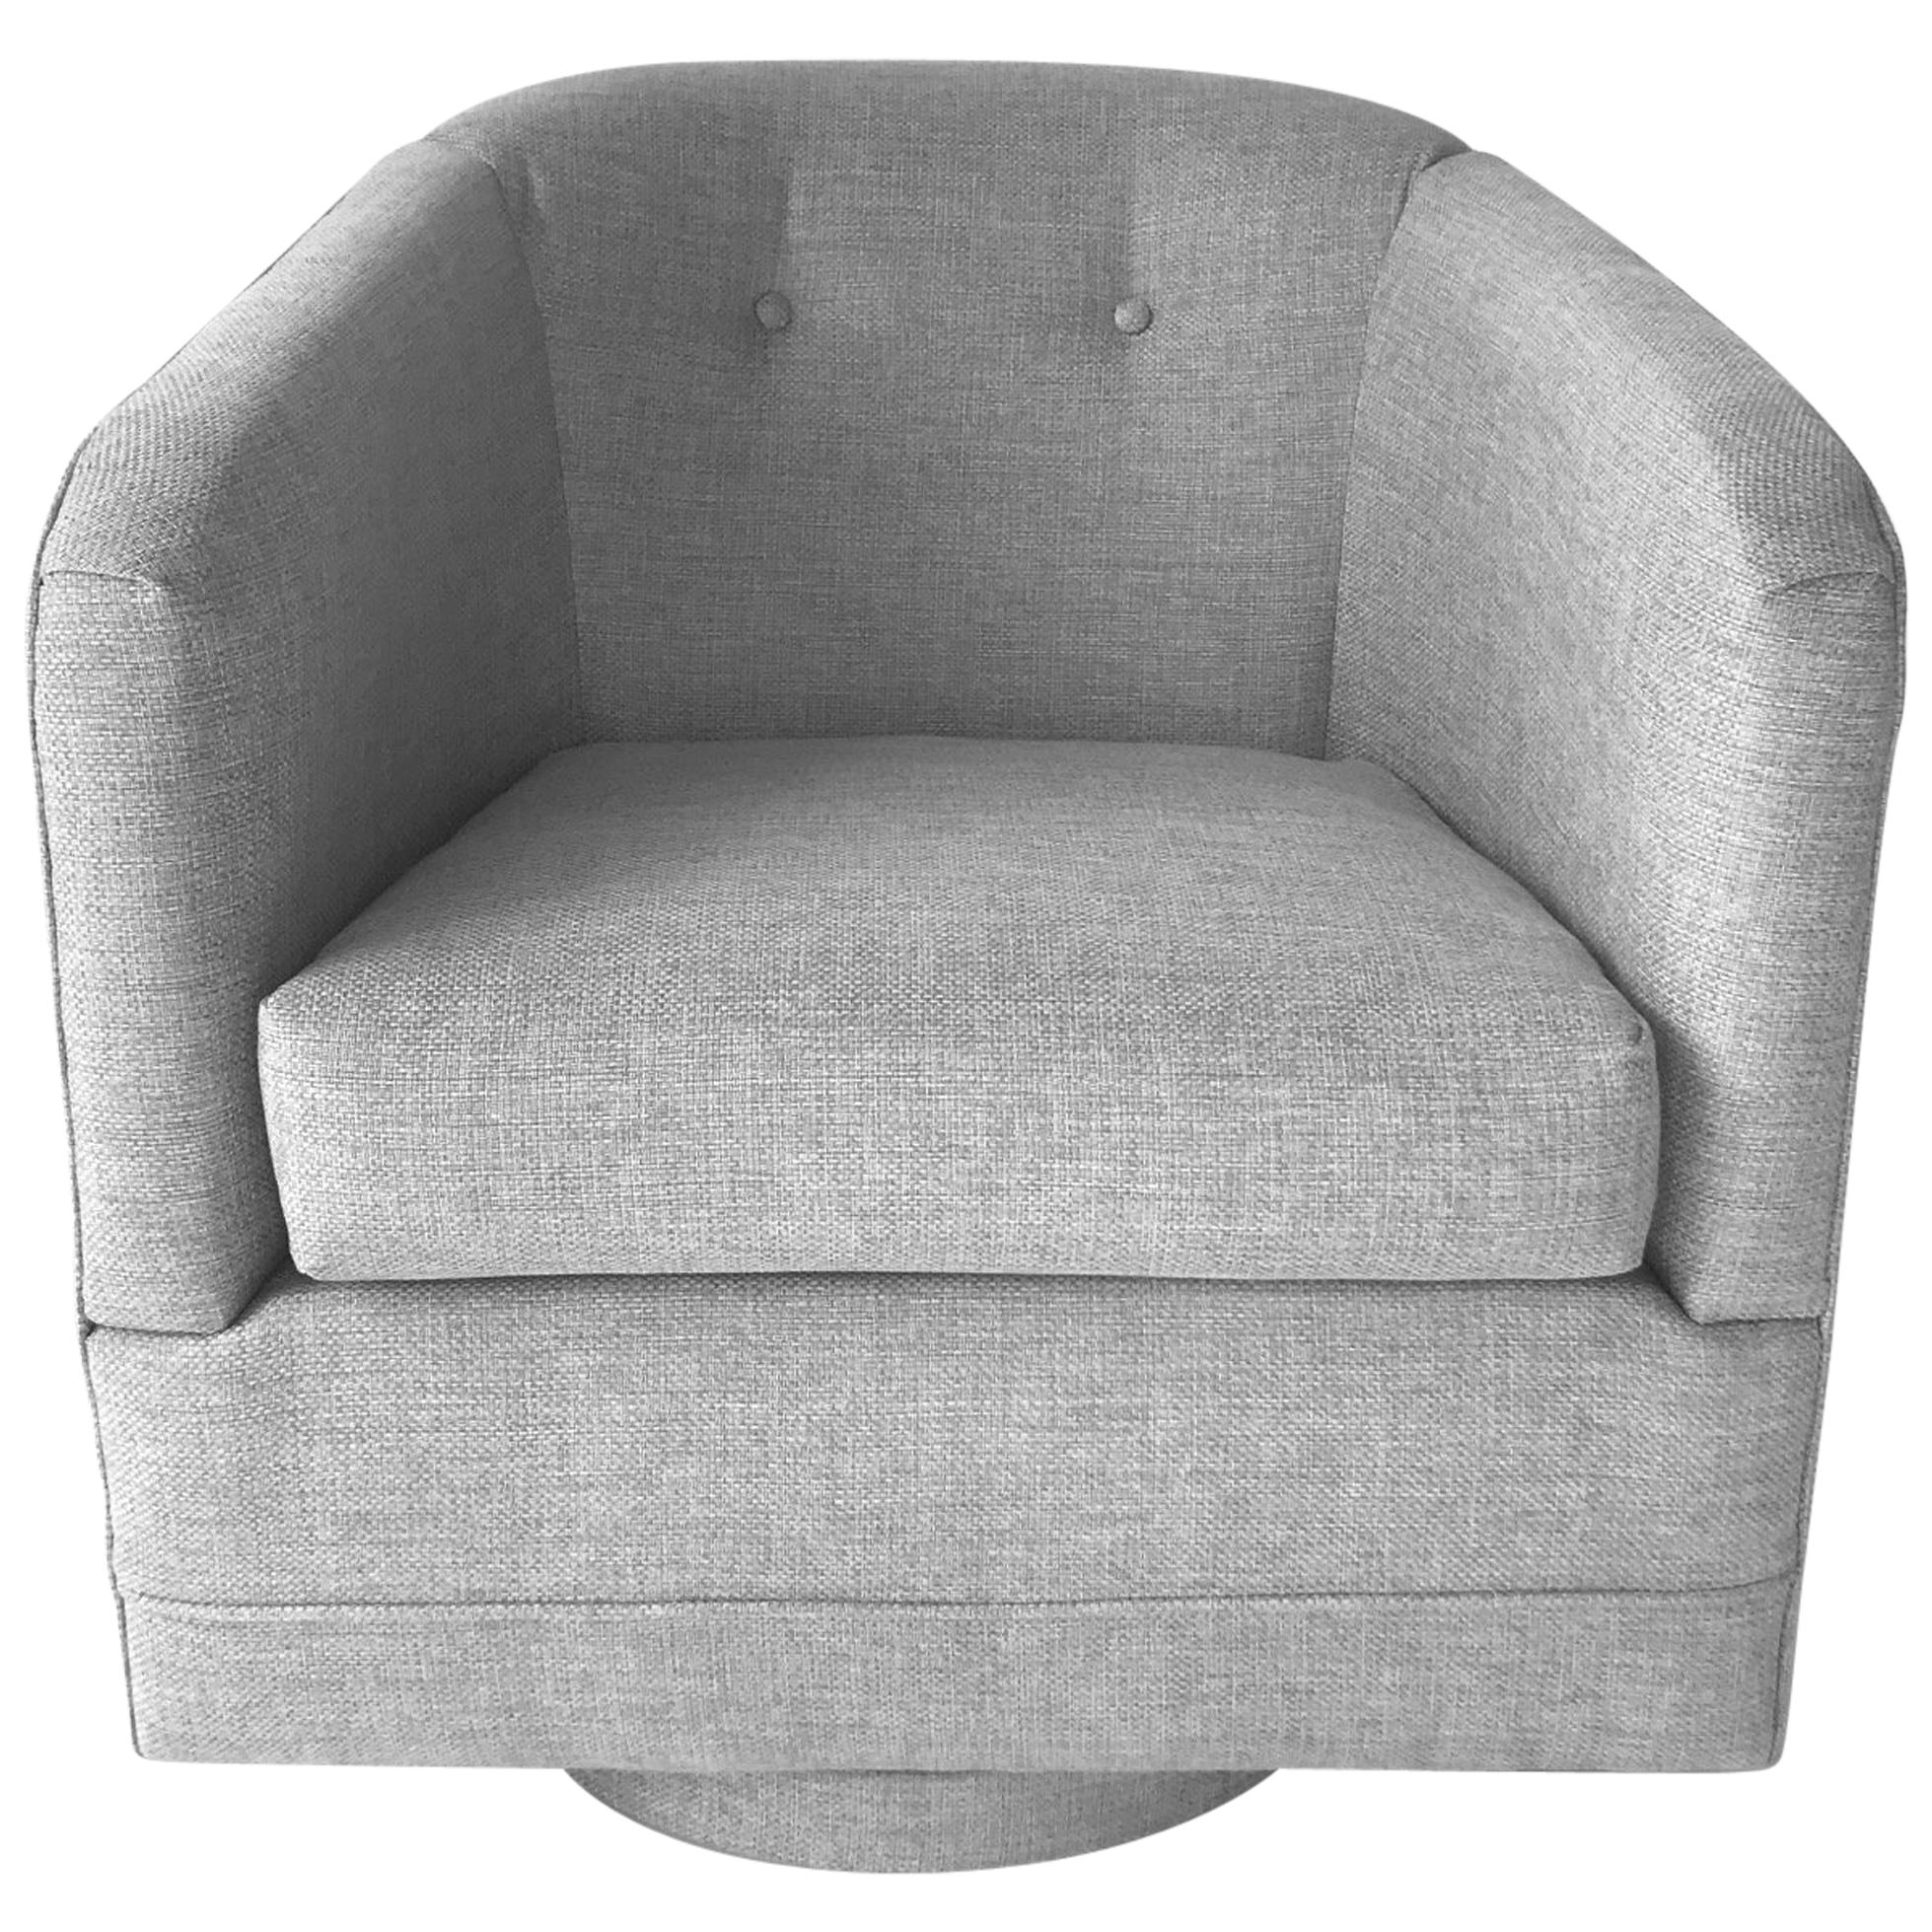 1970s Woven Upholstered Swivel Lounge Chair by Milo Baughman